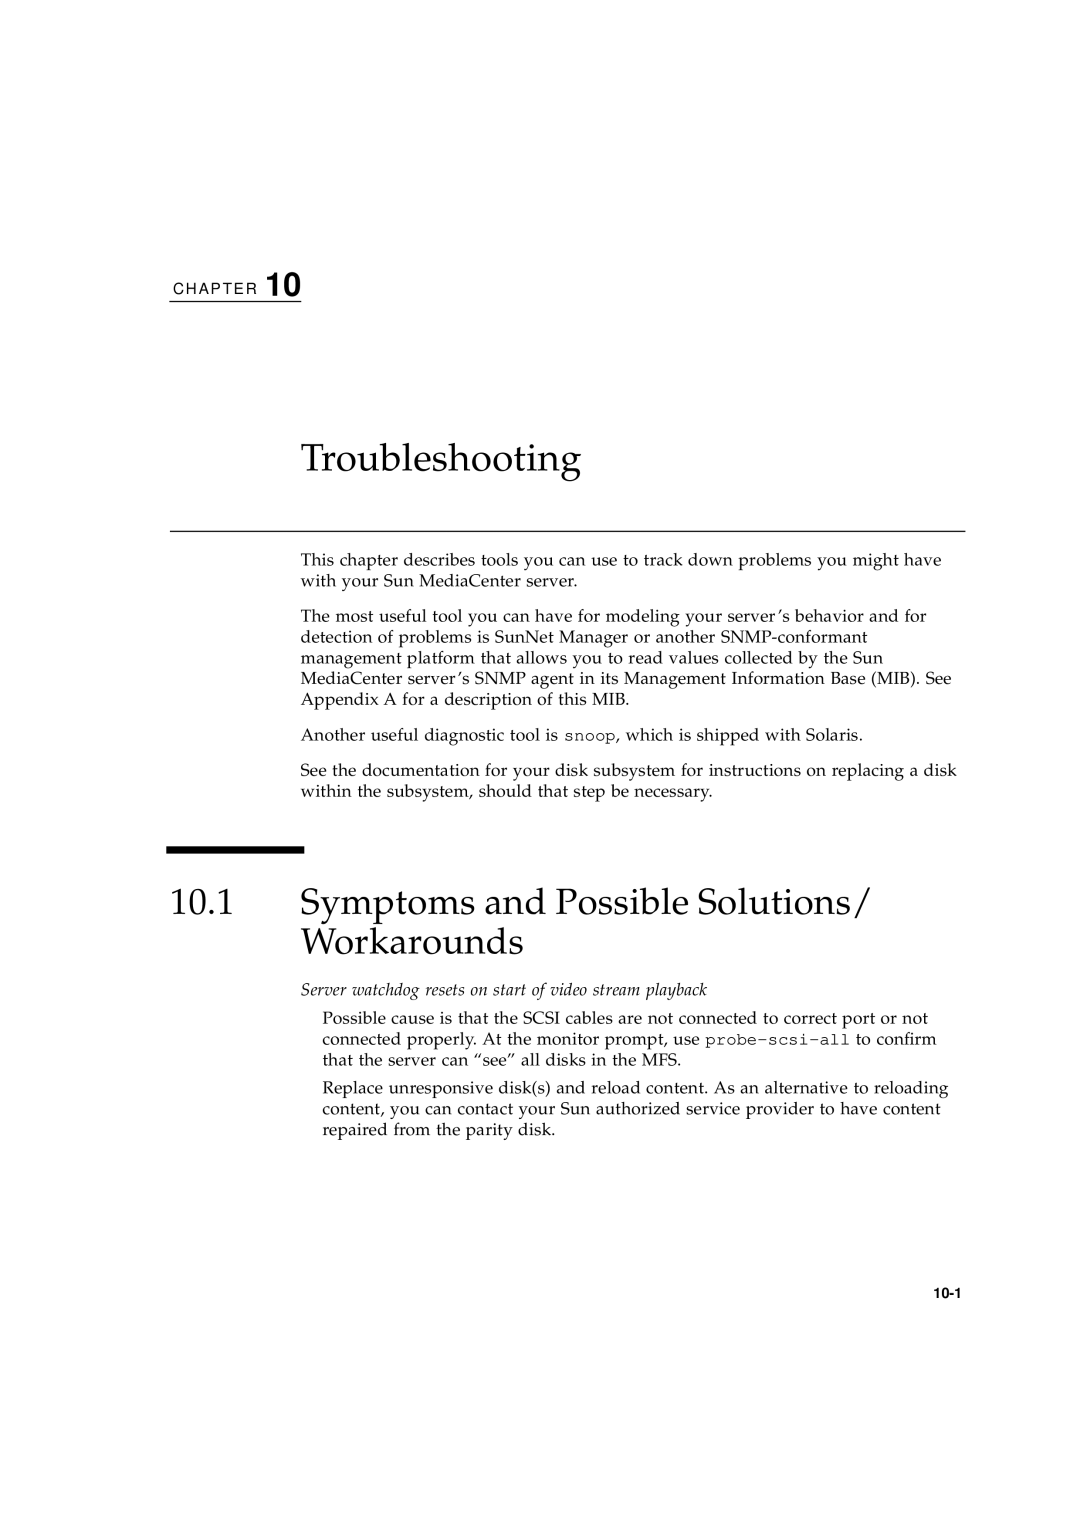 Sun Microsystems 2.1 manual Troubleshooting, Symptoms and Possible Solutions/ Workarounds 